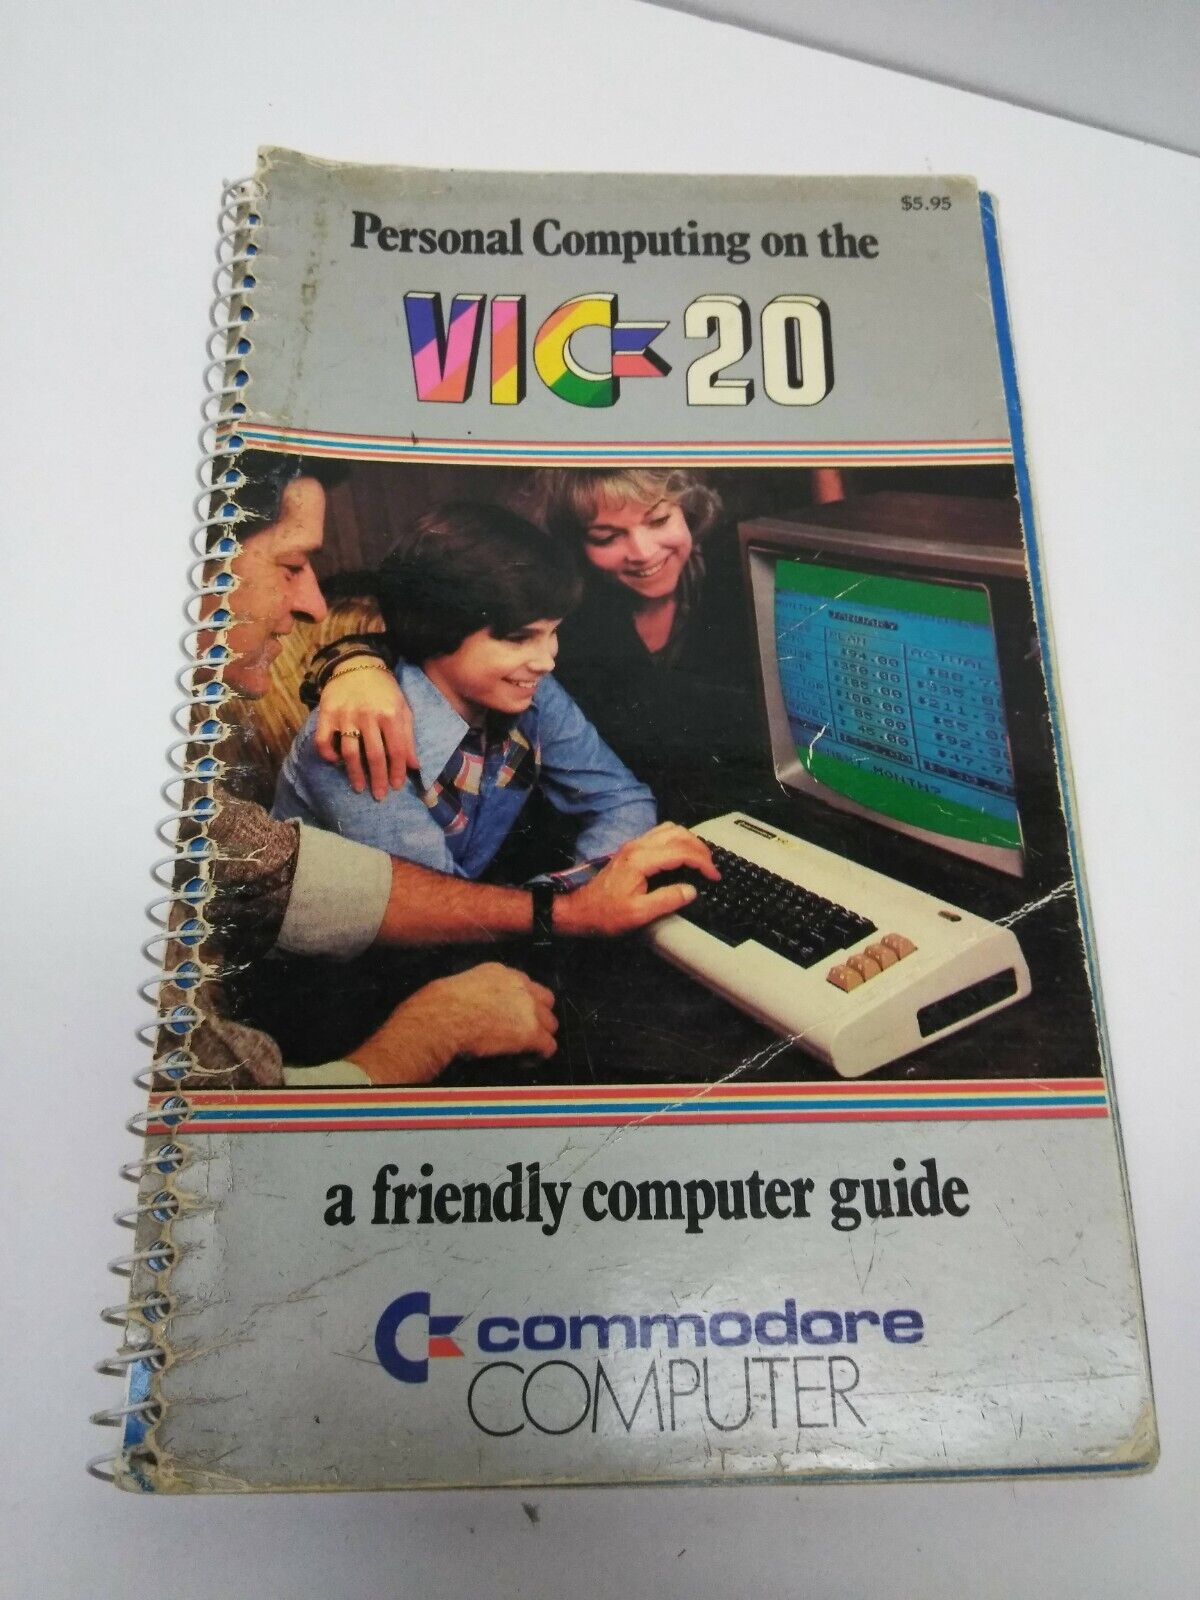 VTG 1982 Personal Computing on the VIC 20 COMMODORE Computer USER GUIDE BOOK